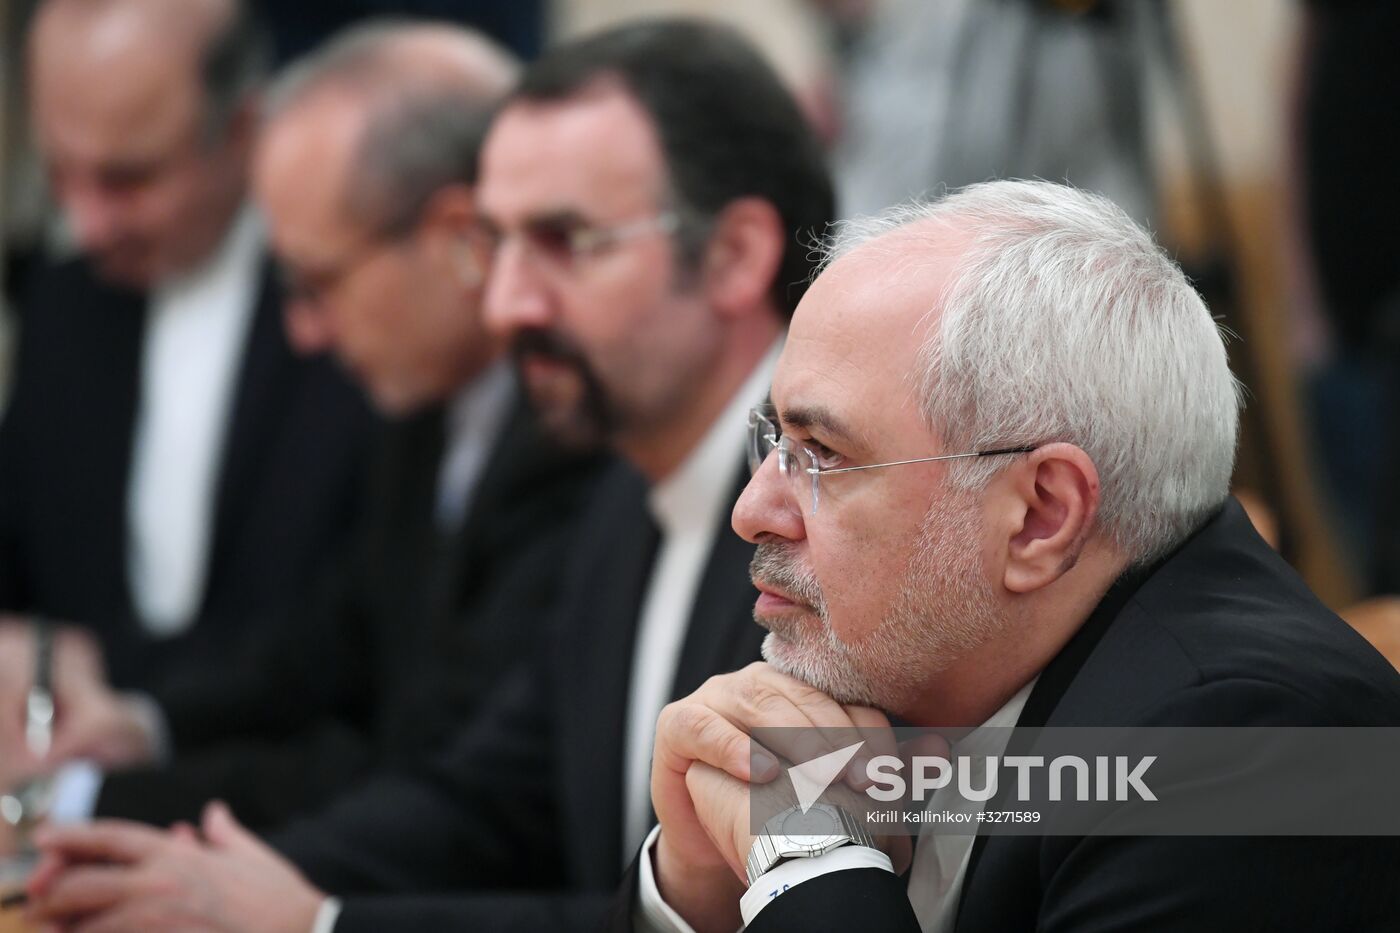 Meeting of Russian and Iranian Foreign Ministers Sergei Lavrov and Mohammad Javad Zarif